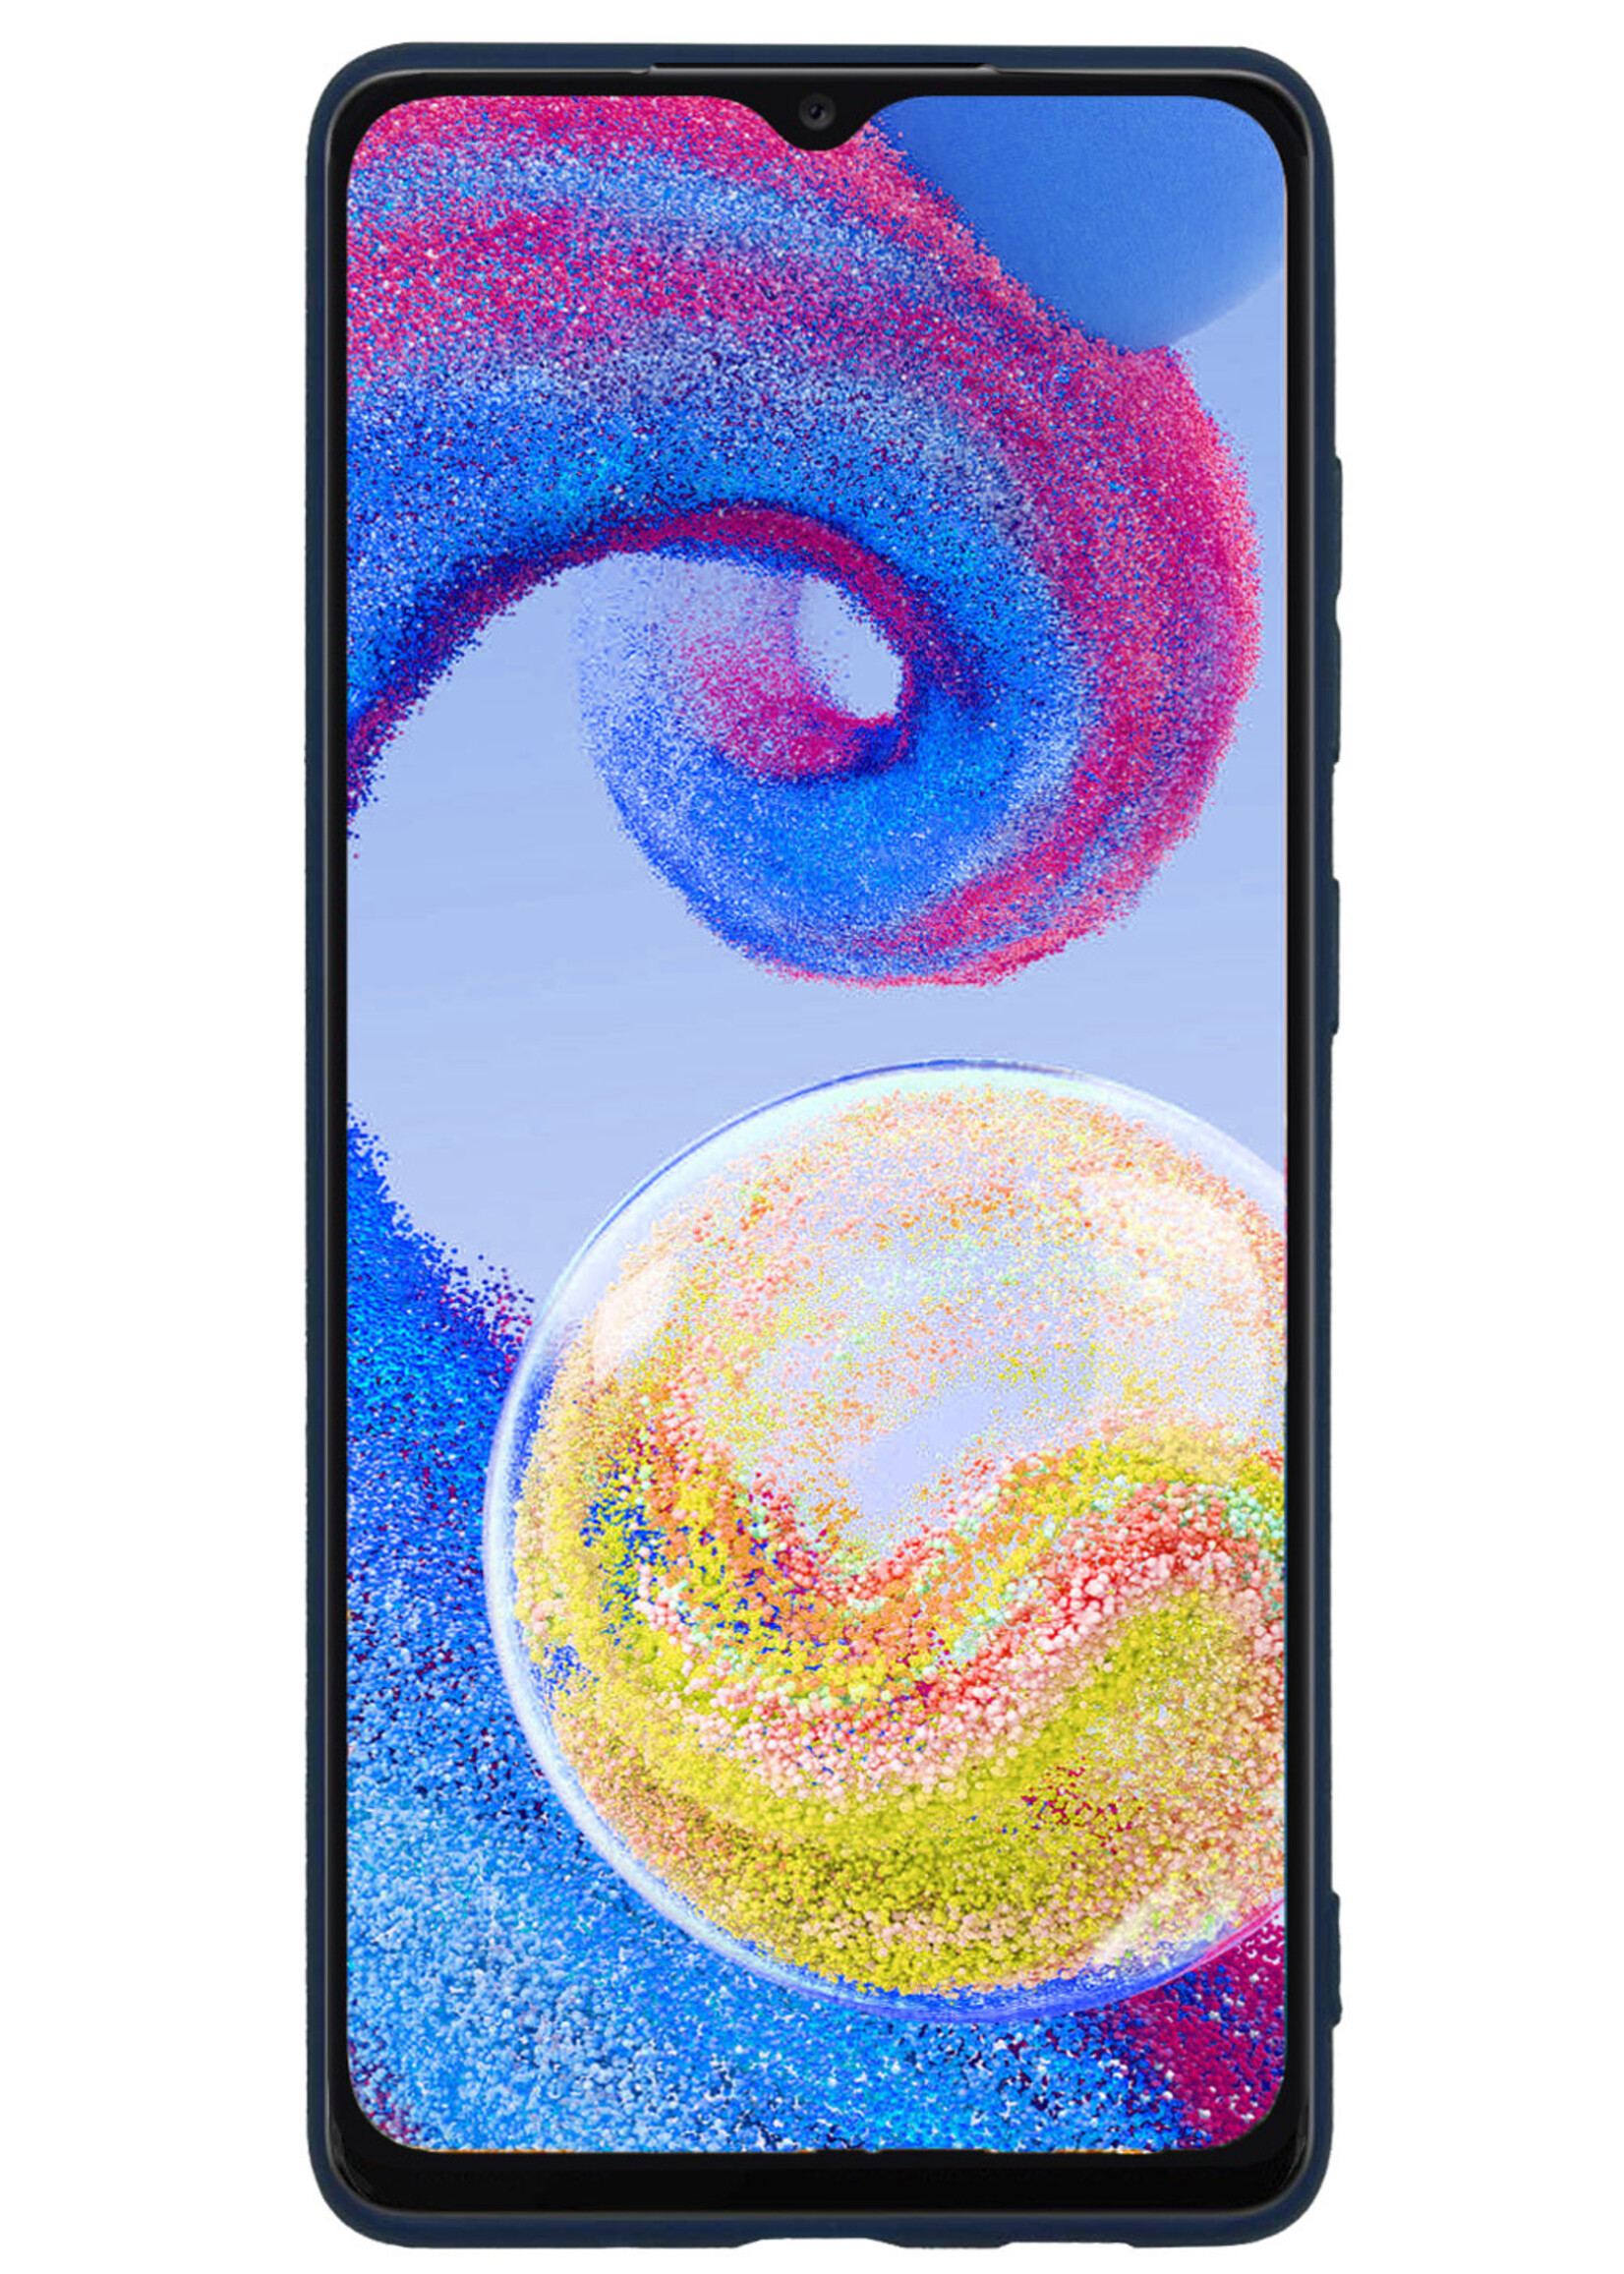 BTH Hoesje Geschikt voor Samsung A04s Hoesje Siliconen Case Hoes - Hoes Geschikt voor Samsung Galaxy A04s Hoes Cover Case - Donkerblauw - 2 PACK